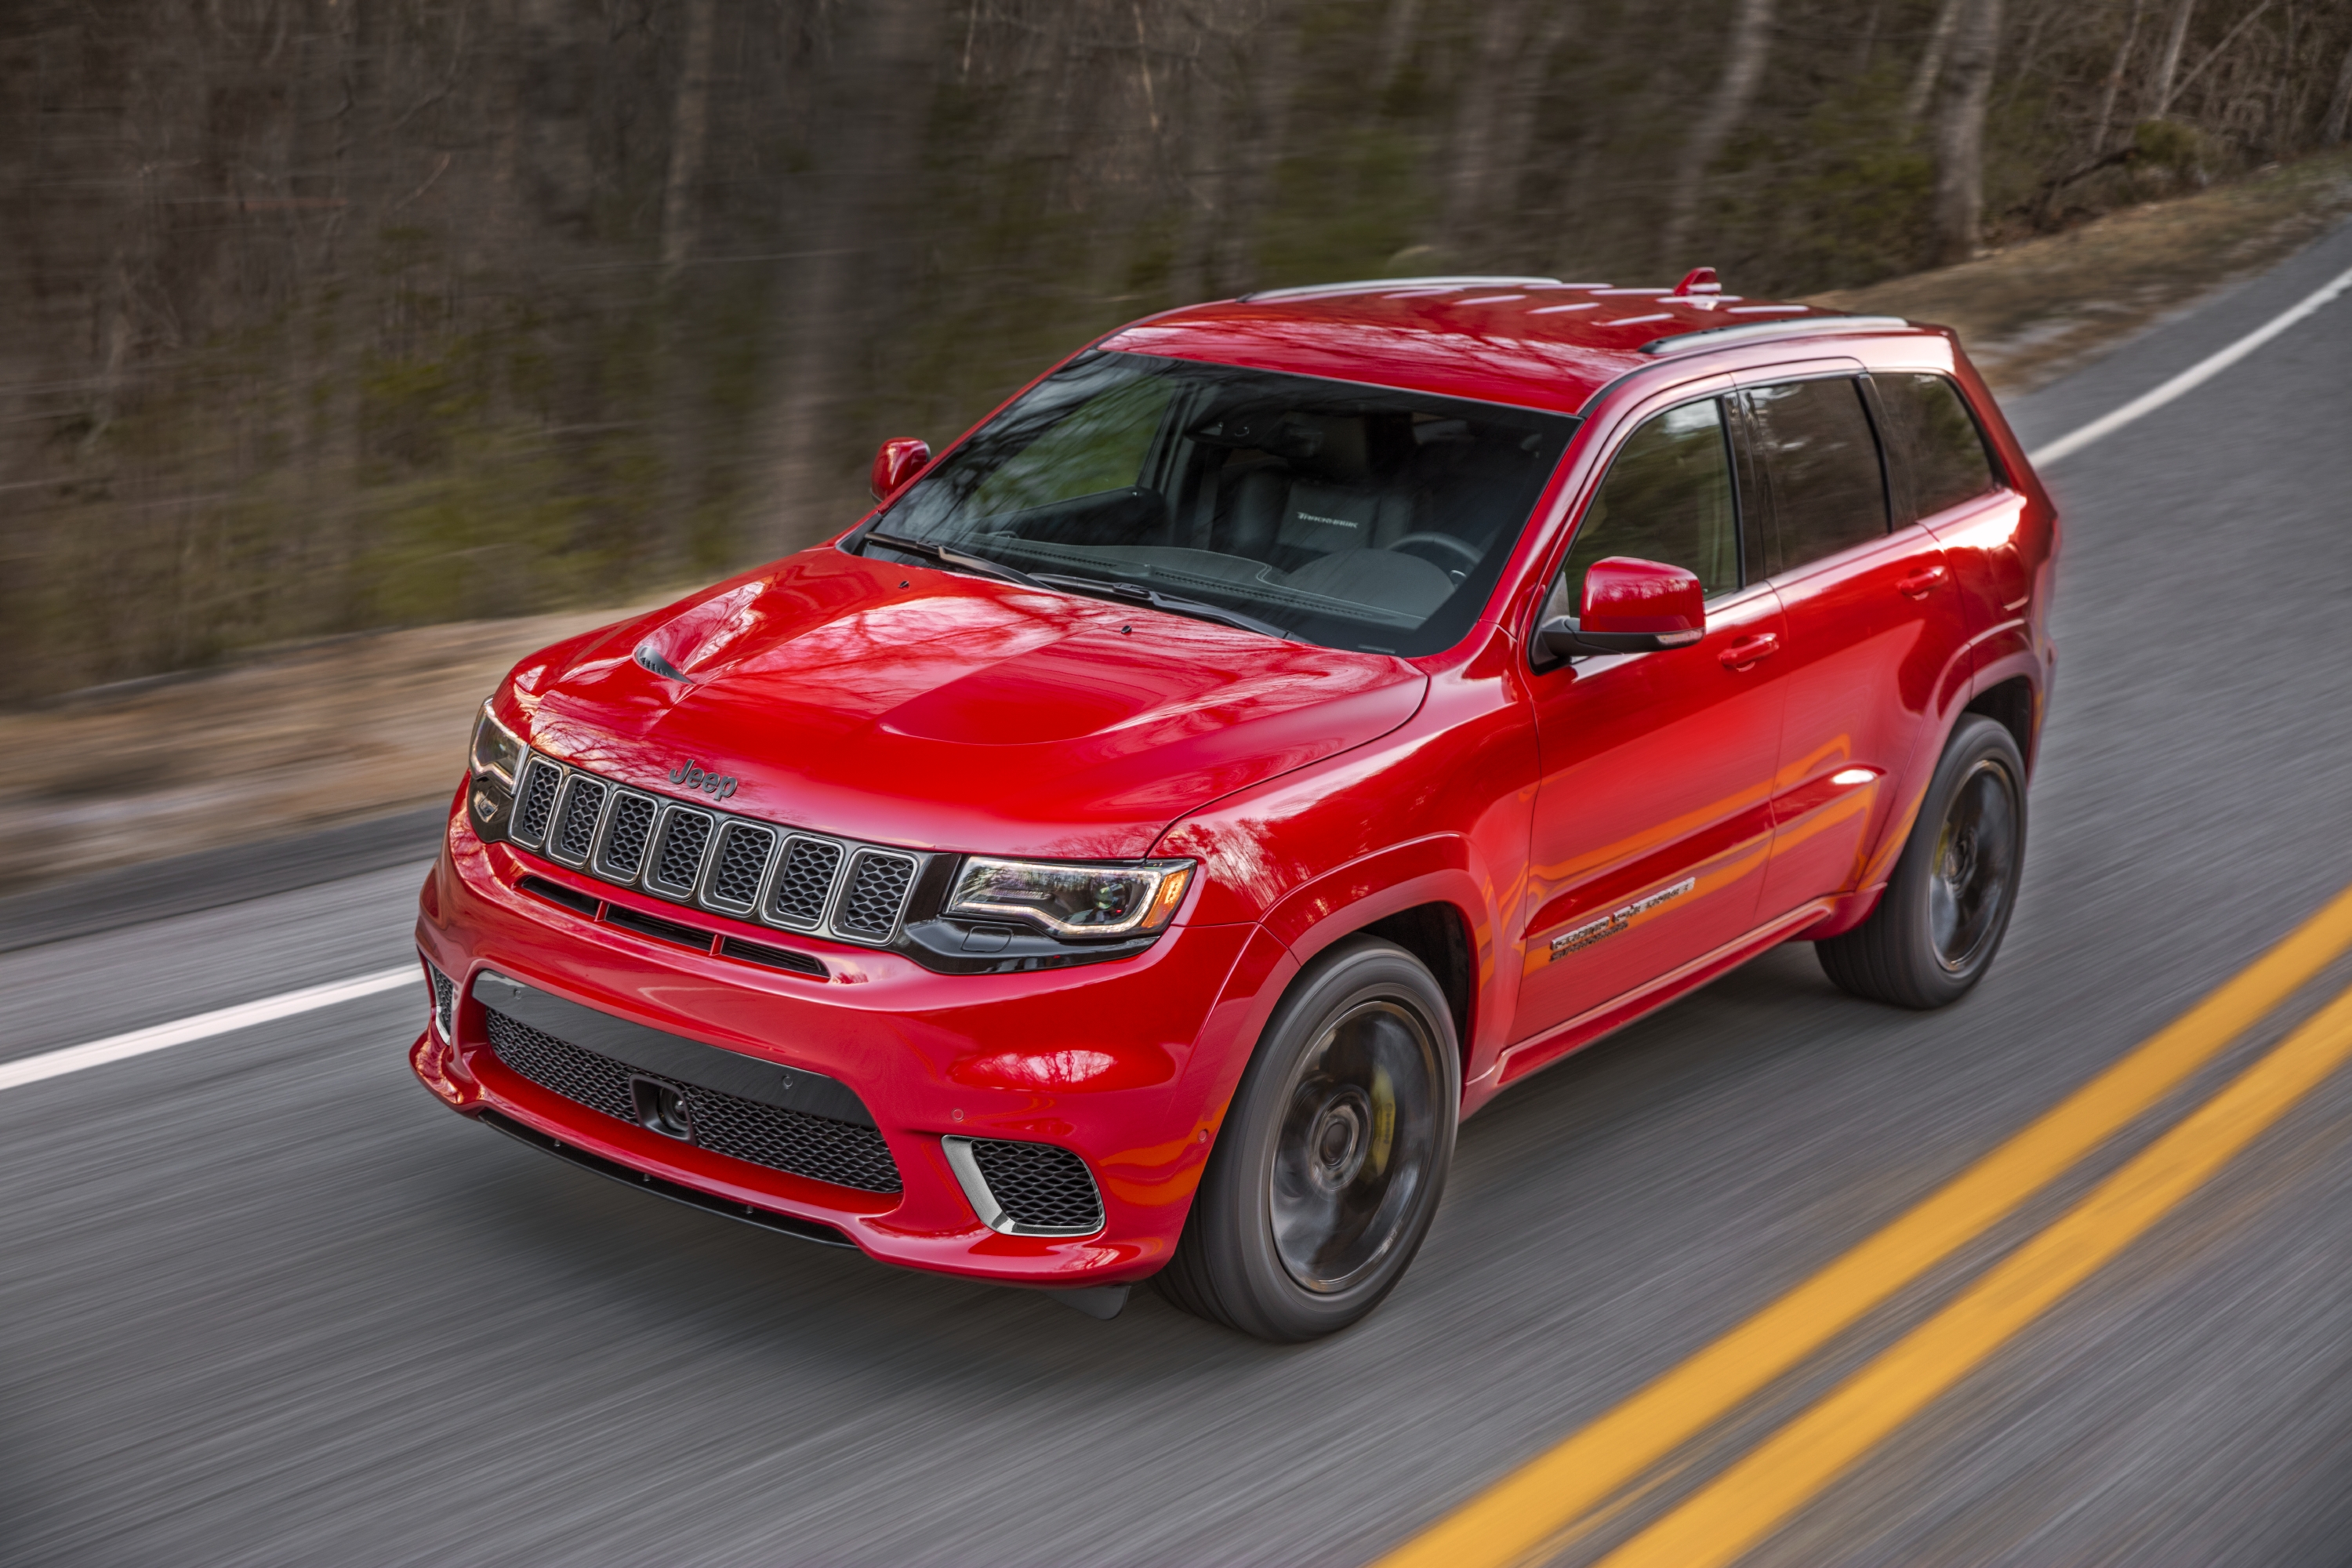 2020 Jeep Grand Cherokee Trackhawk driving on forest road